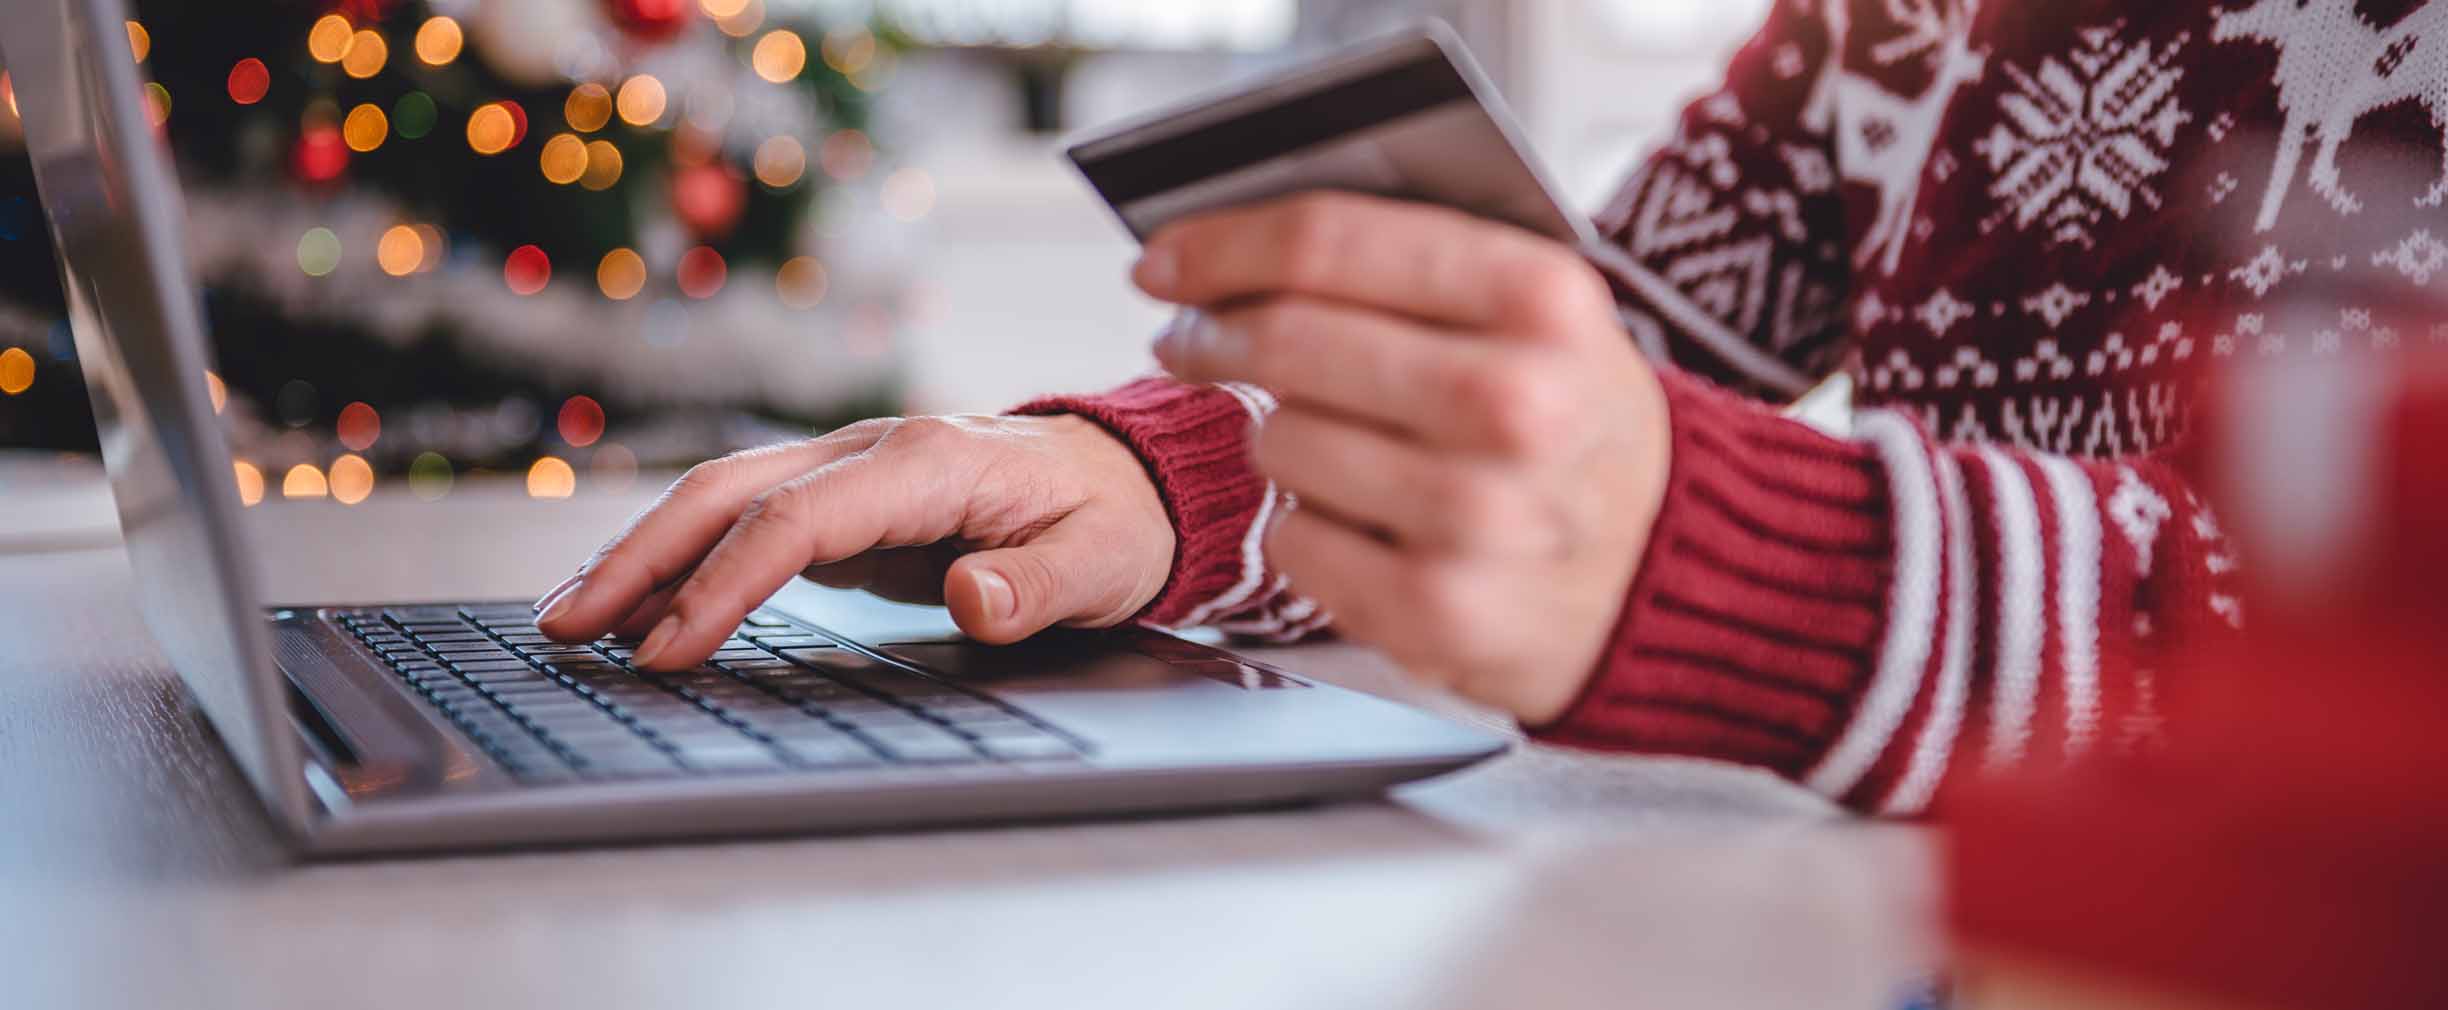 woman with credit card in hand shopping online during holidays